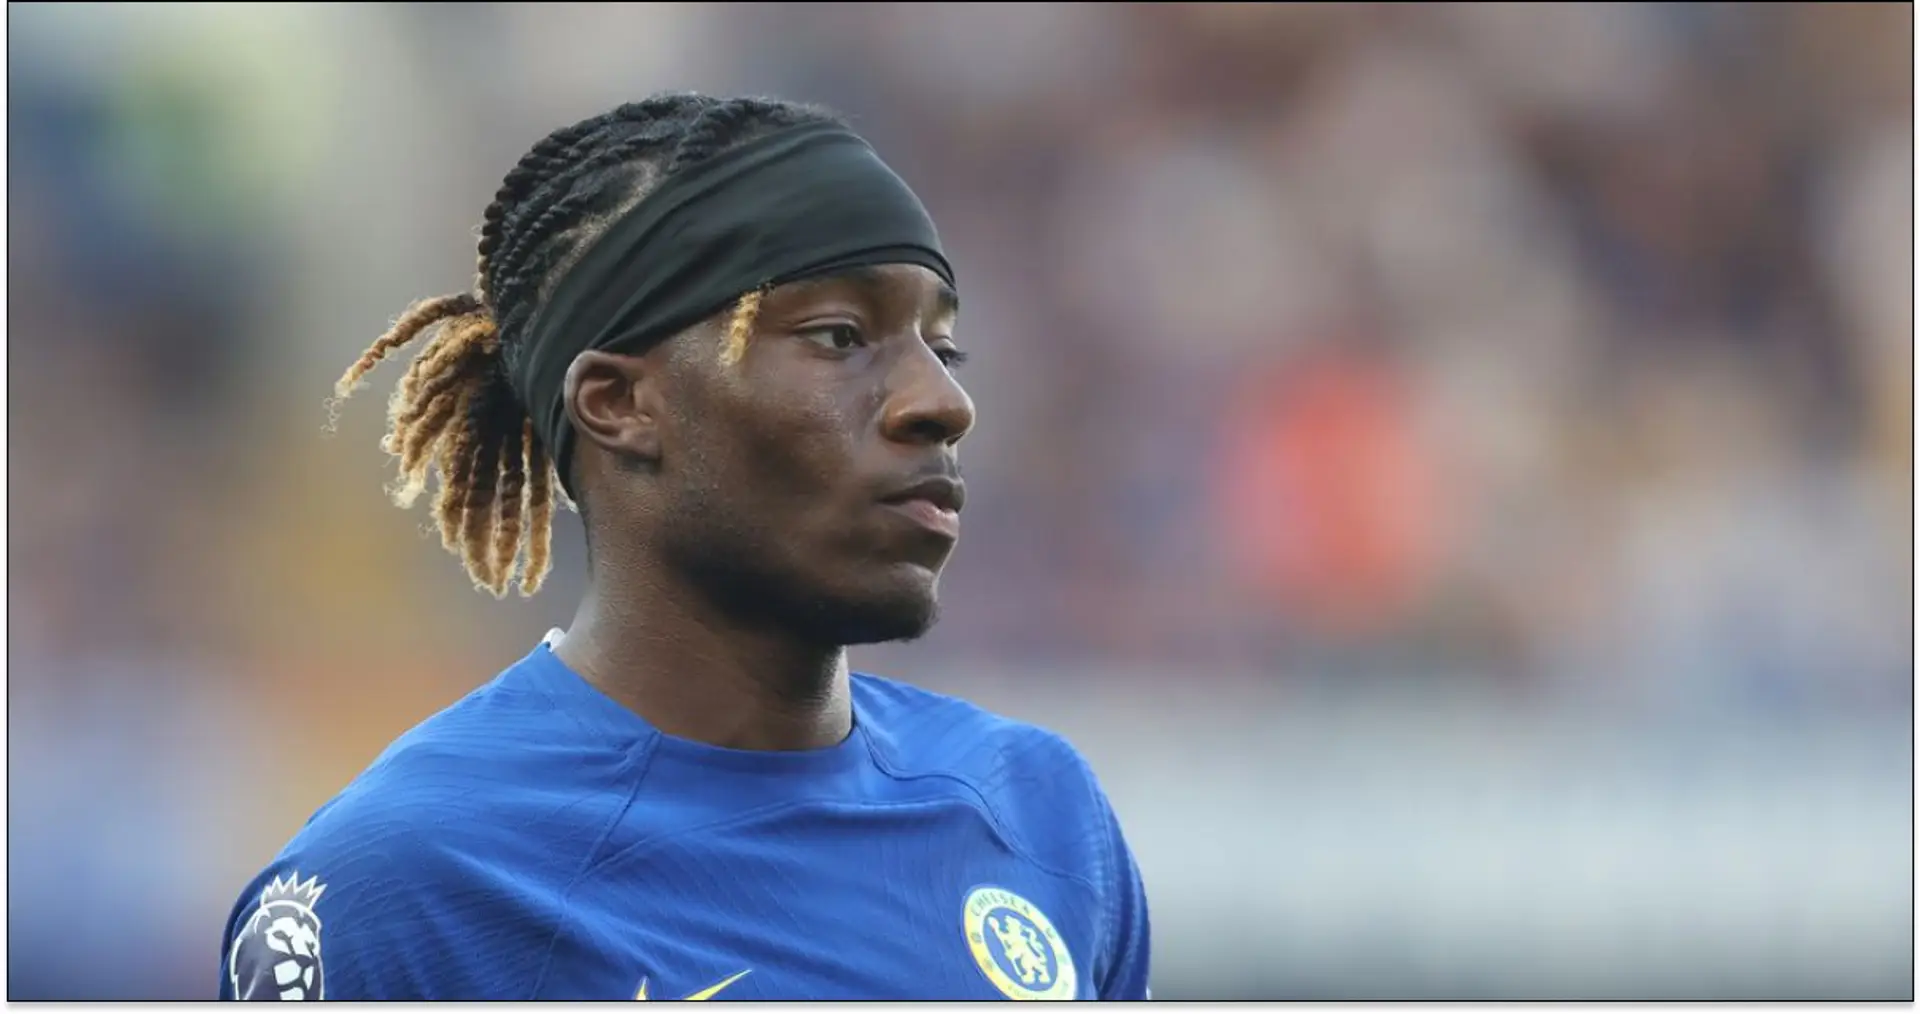 'When we fire we're a match for any team': Madueke talks Chelsea 'process'